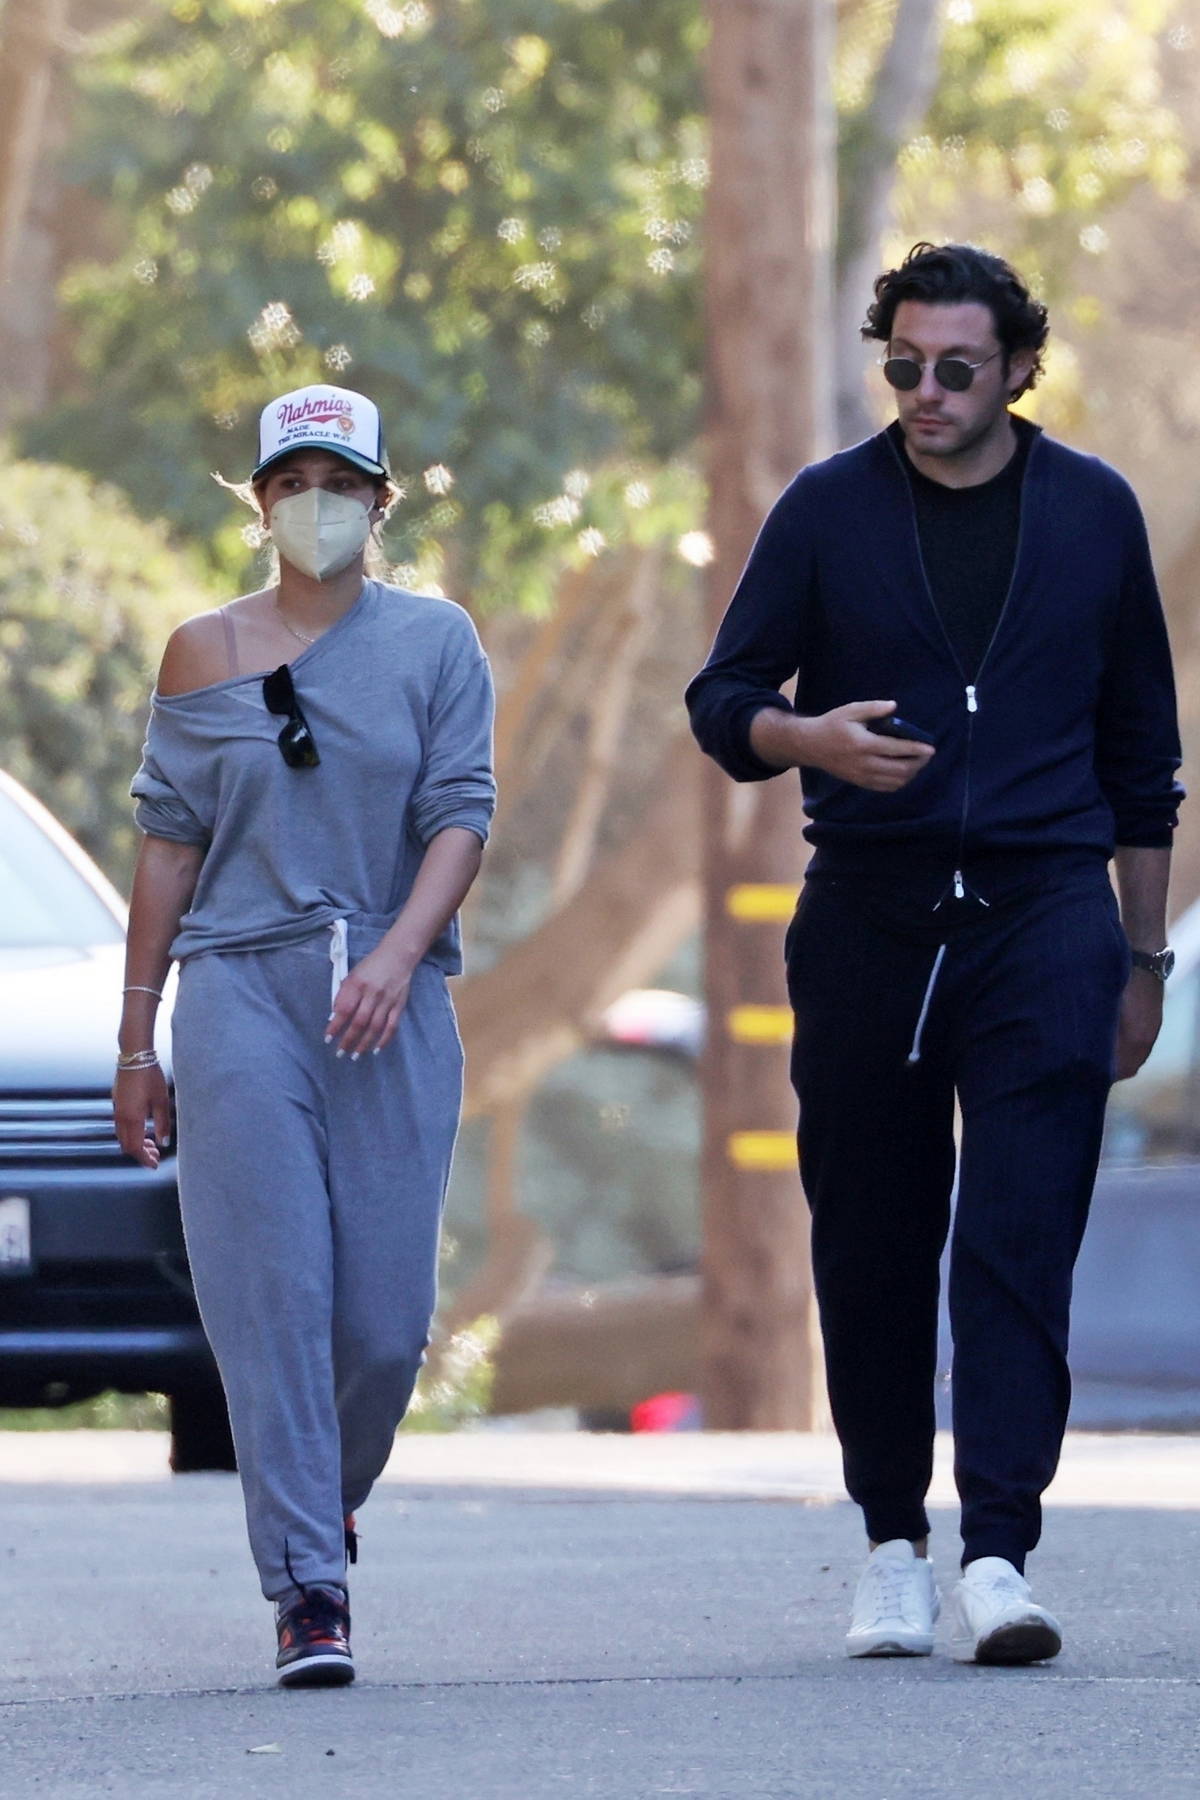 https://www.celebsfirst.com/wp-content/uploads/2021/03/sofia-richie-dresses-down-in-grey-sweatsuit-while-out-for-an-evening-stroll-with-a-mystery-man-in-los-angeles-280321_1.jpg